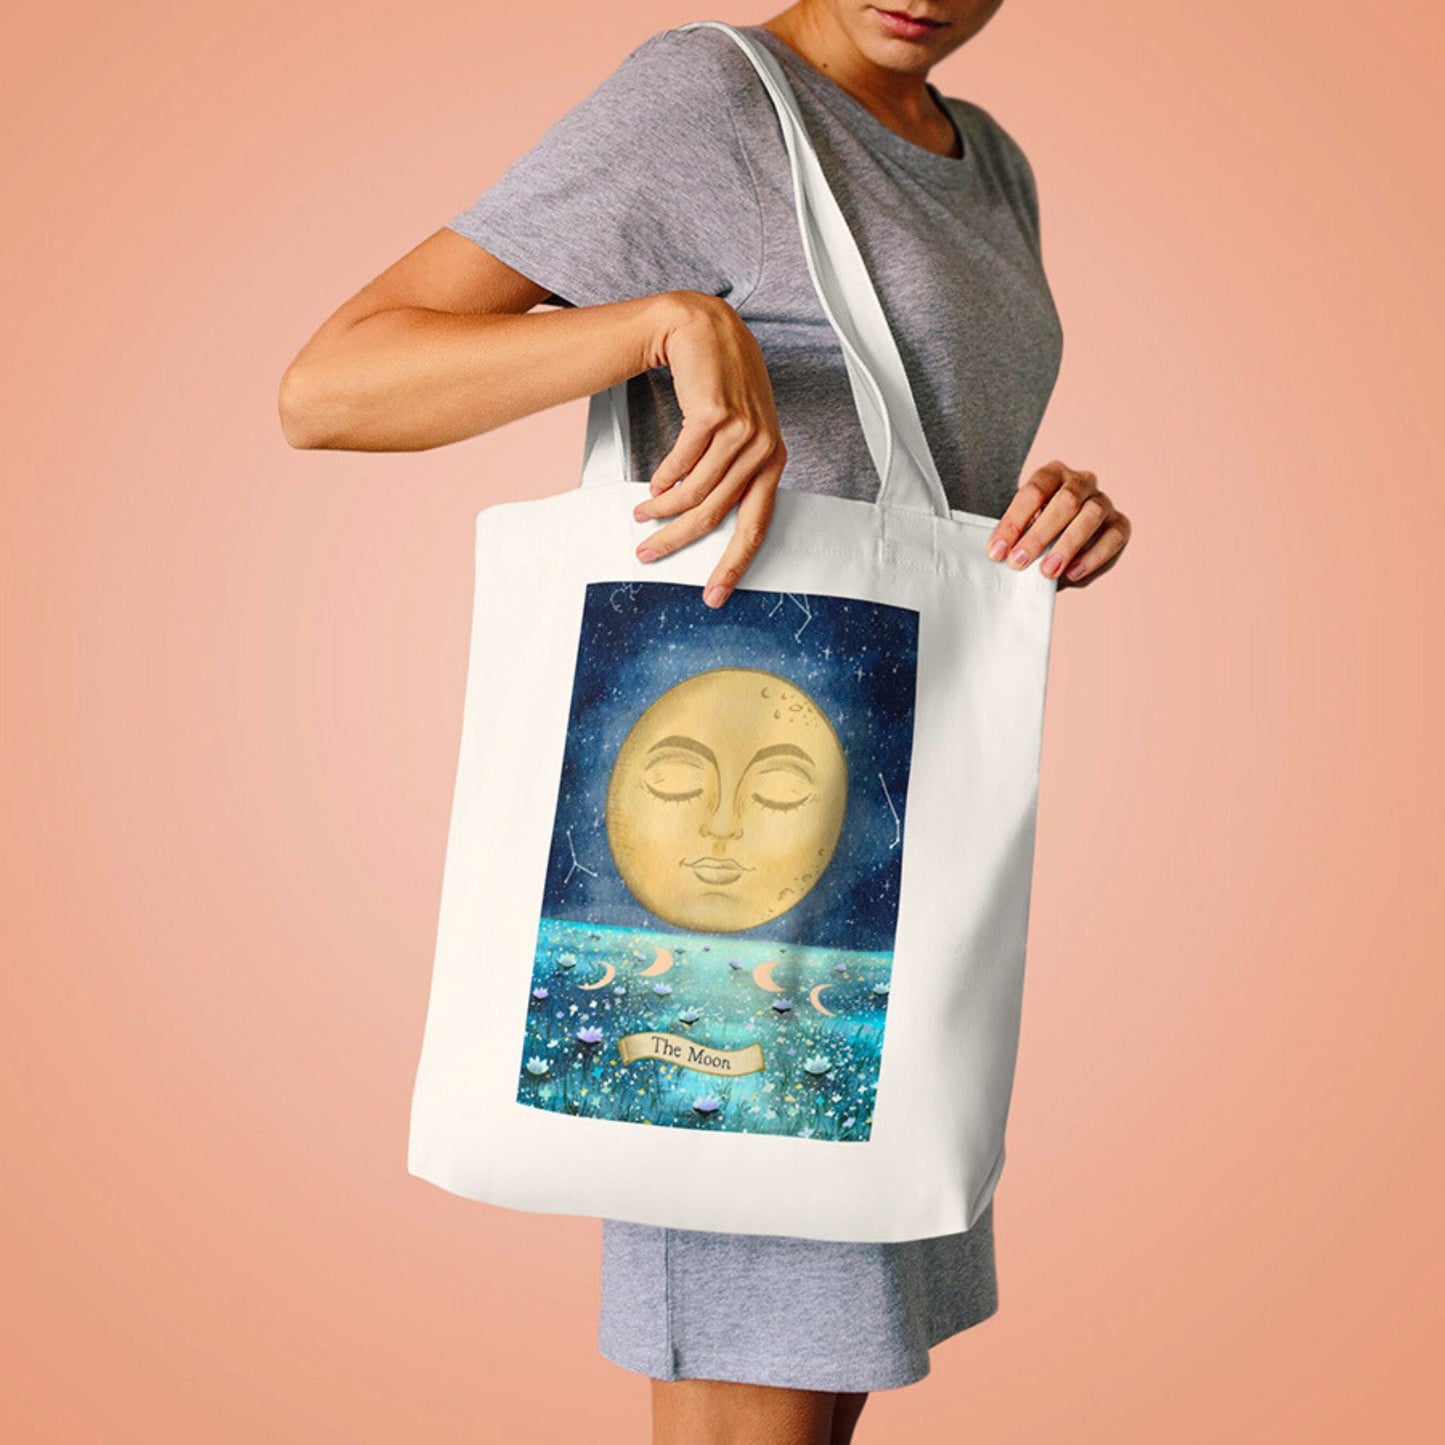 the moon tote bag, celestial tote bag, the moon tarot card tote bag, the moon phases tote bag, witch tote bag, tote bag australia, free shipping tote bags australia, tote bags with artwork, tote bags with paintings, watercolor tote bag, gouache tote bags, wicca tote bags, cottagecore tote bags, astrology tote bags, astronomy tote bags, universe tote bags, the whole universe tote bags